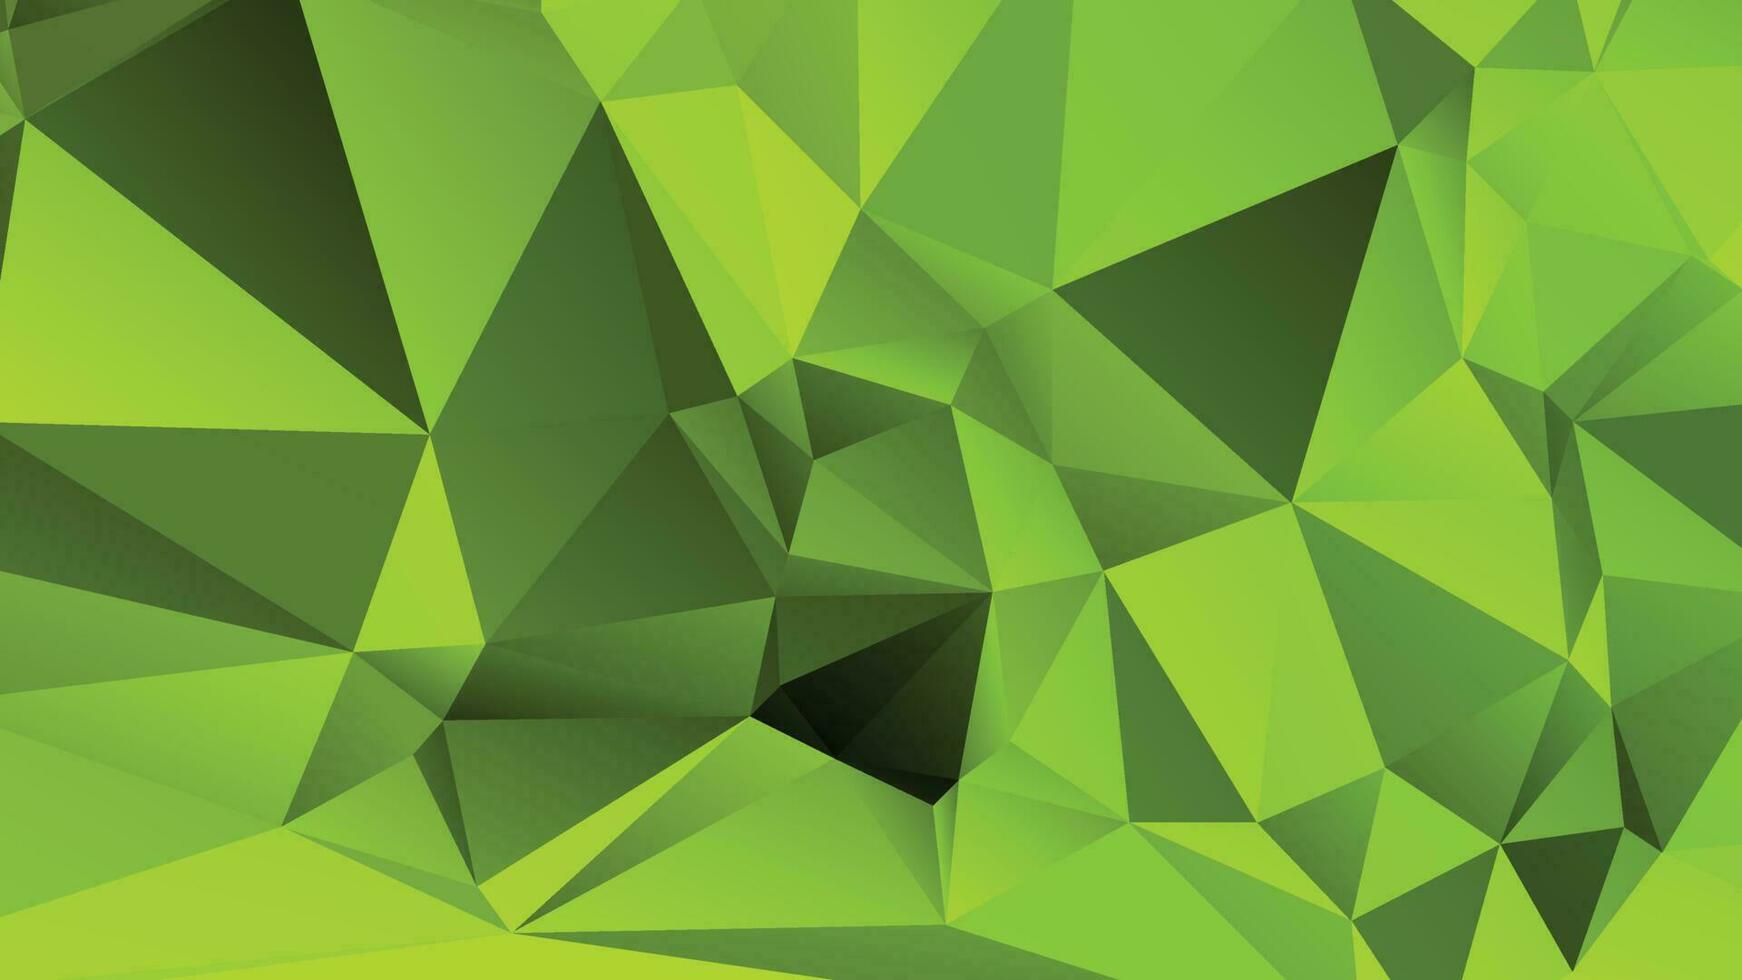 Green Color Polygon Background Design, Abstract Geometric Origami Style With Gradient vector